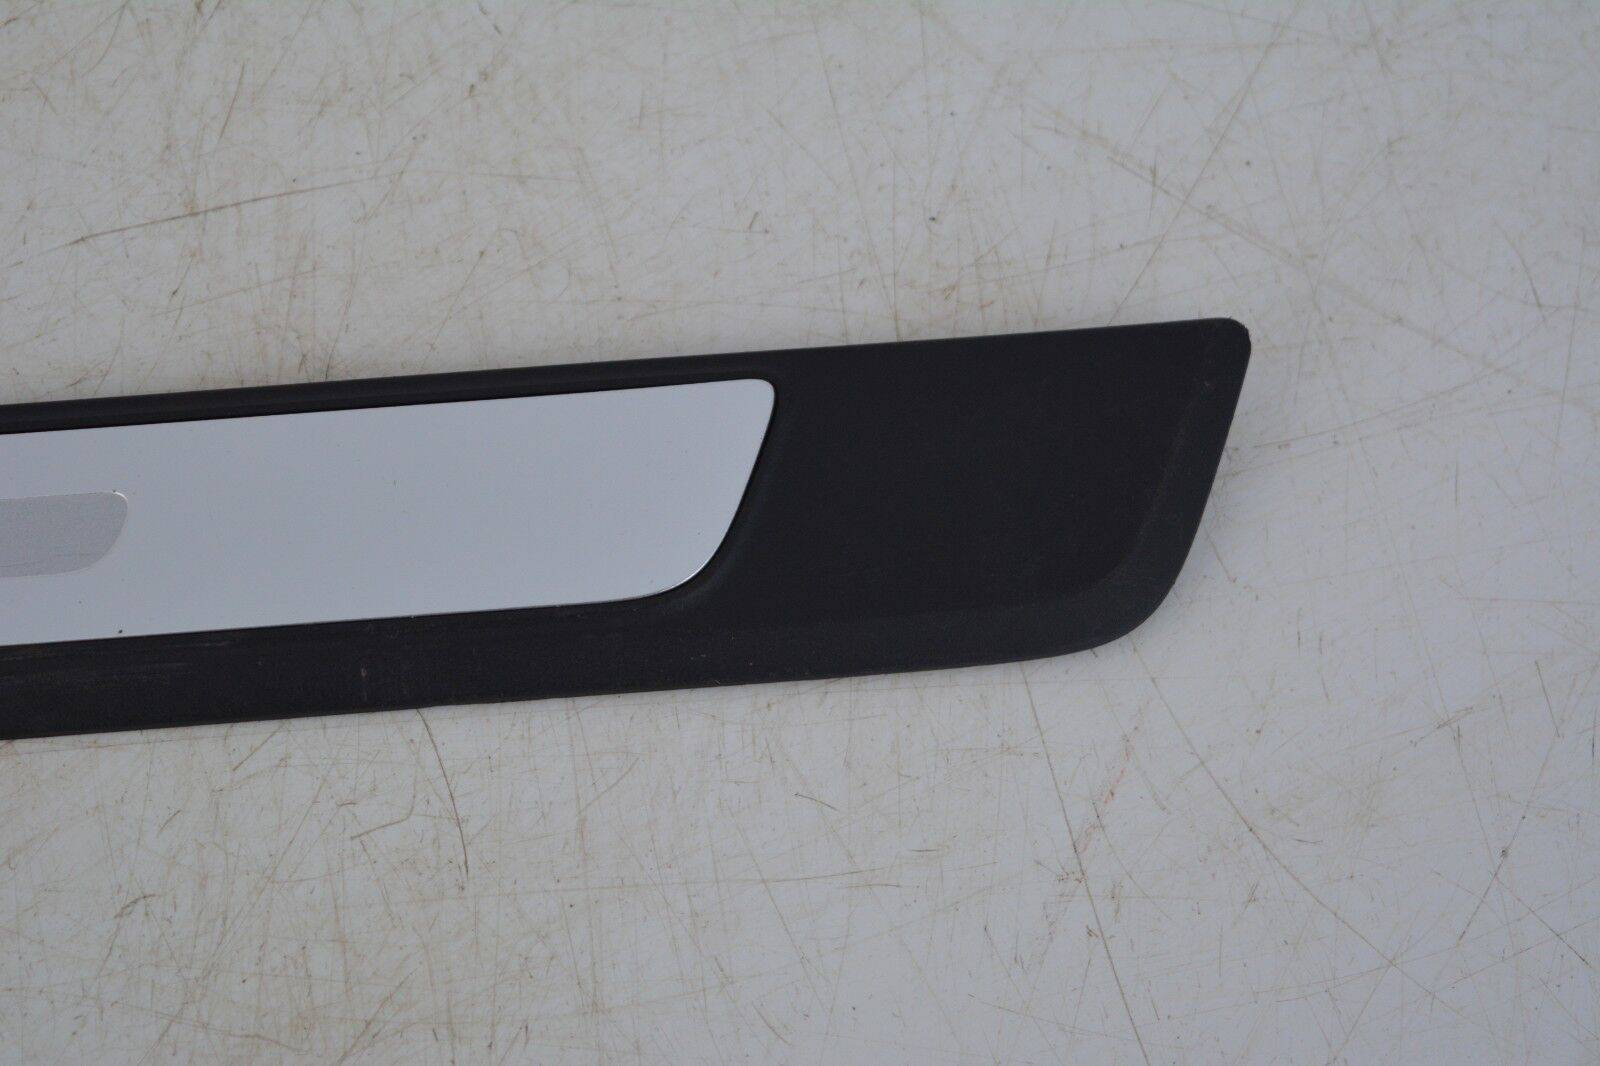 Audi-A4-Door-Sill-Entry-Trim-Front-Left-8W0853373F-Genuine-176469540383-2